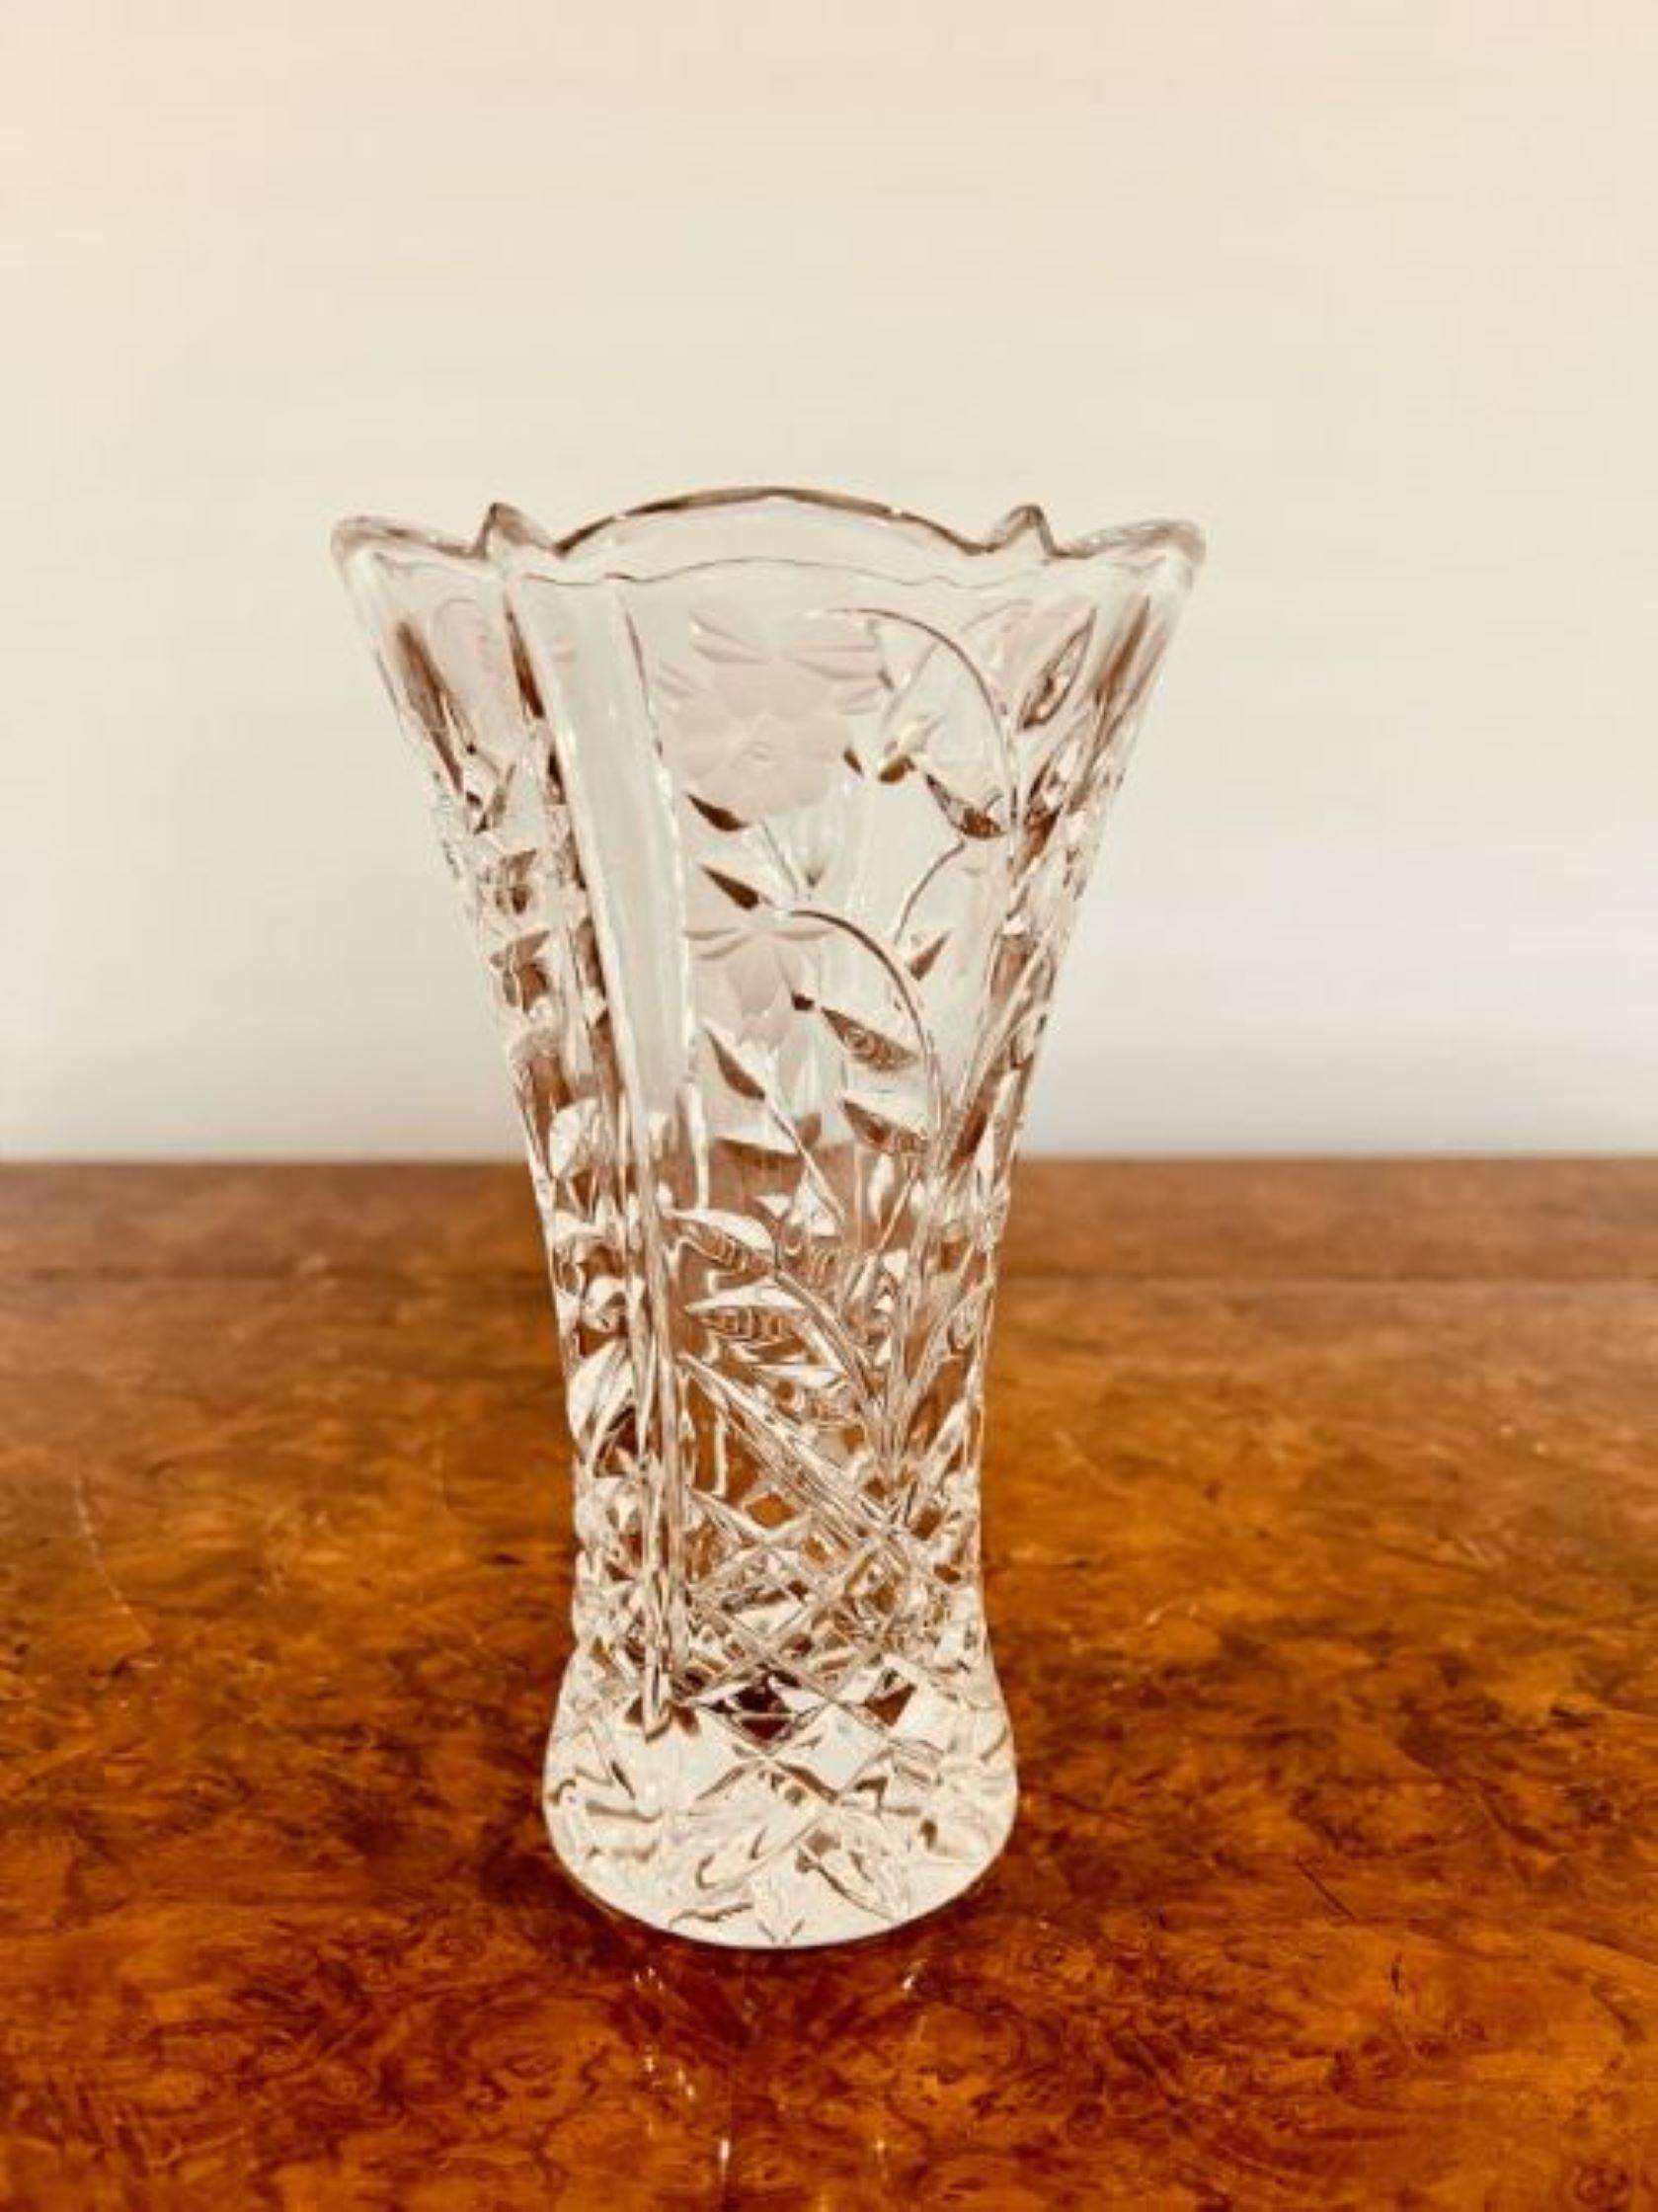 Antique Edwardian cut glass vase having a shaped top to this quality cut glass antique vase